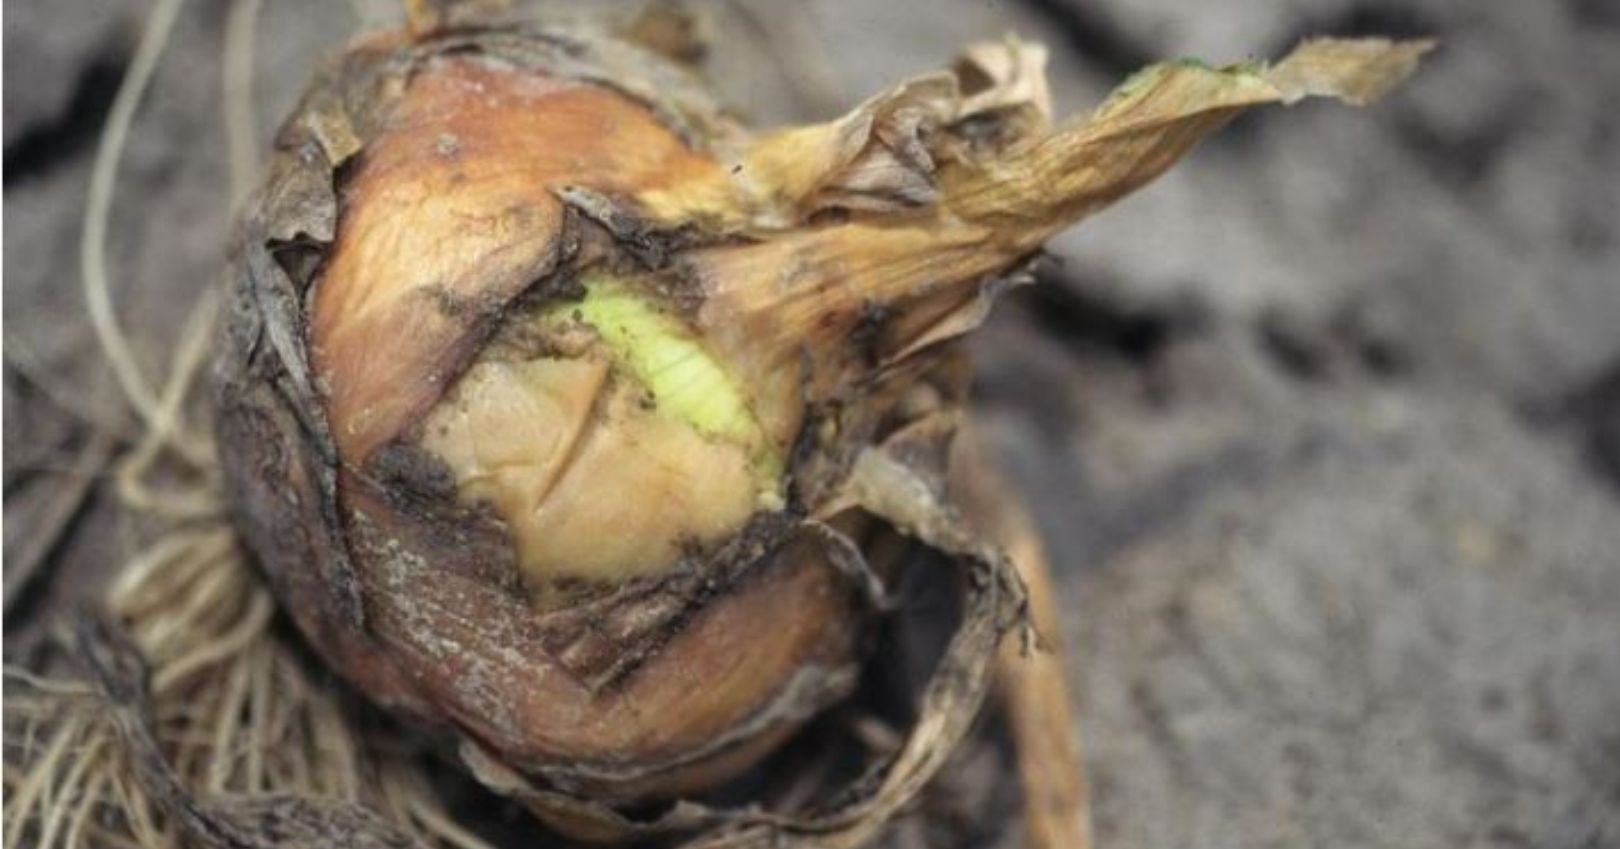 Bacterial Soft Rot in Onions (Howard F. Schwartz, Colorado State University, Bugwood.org)